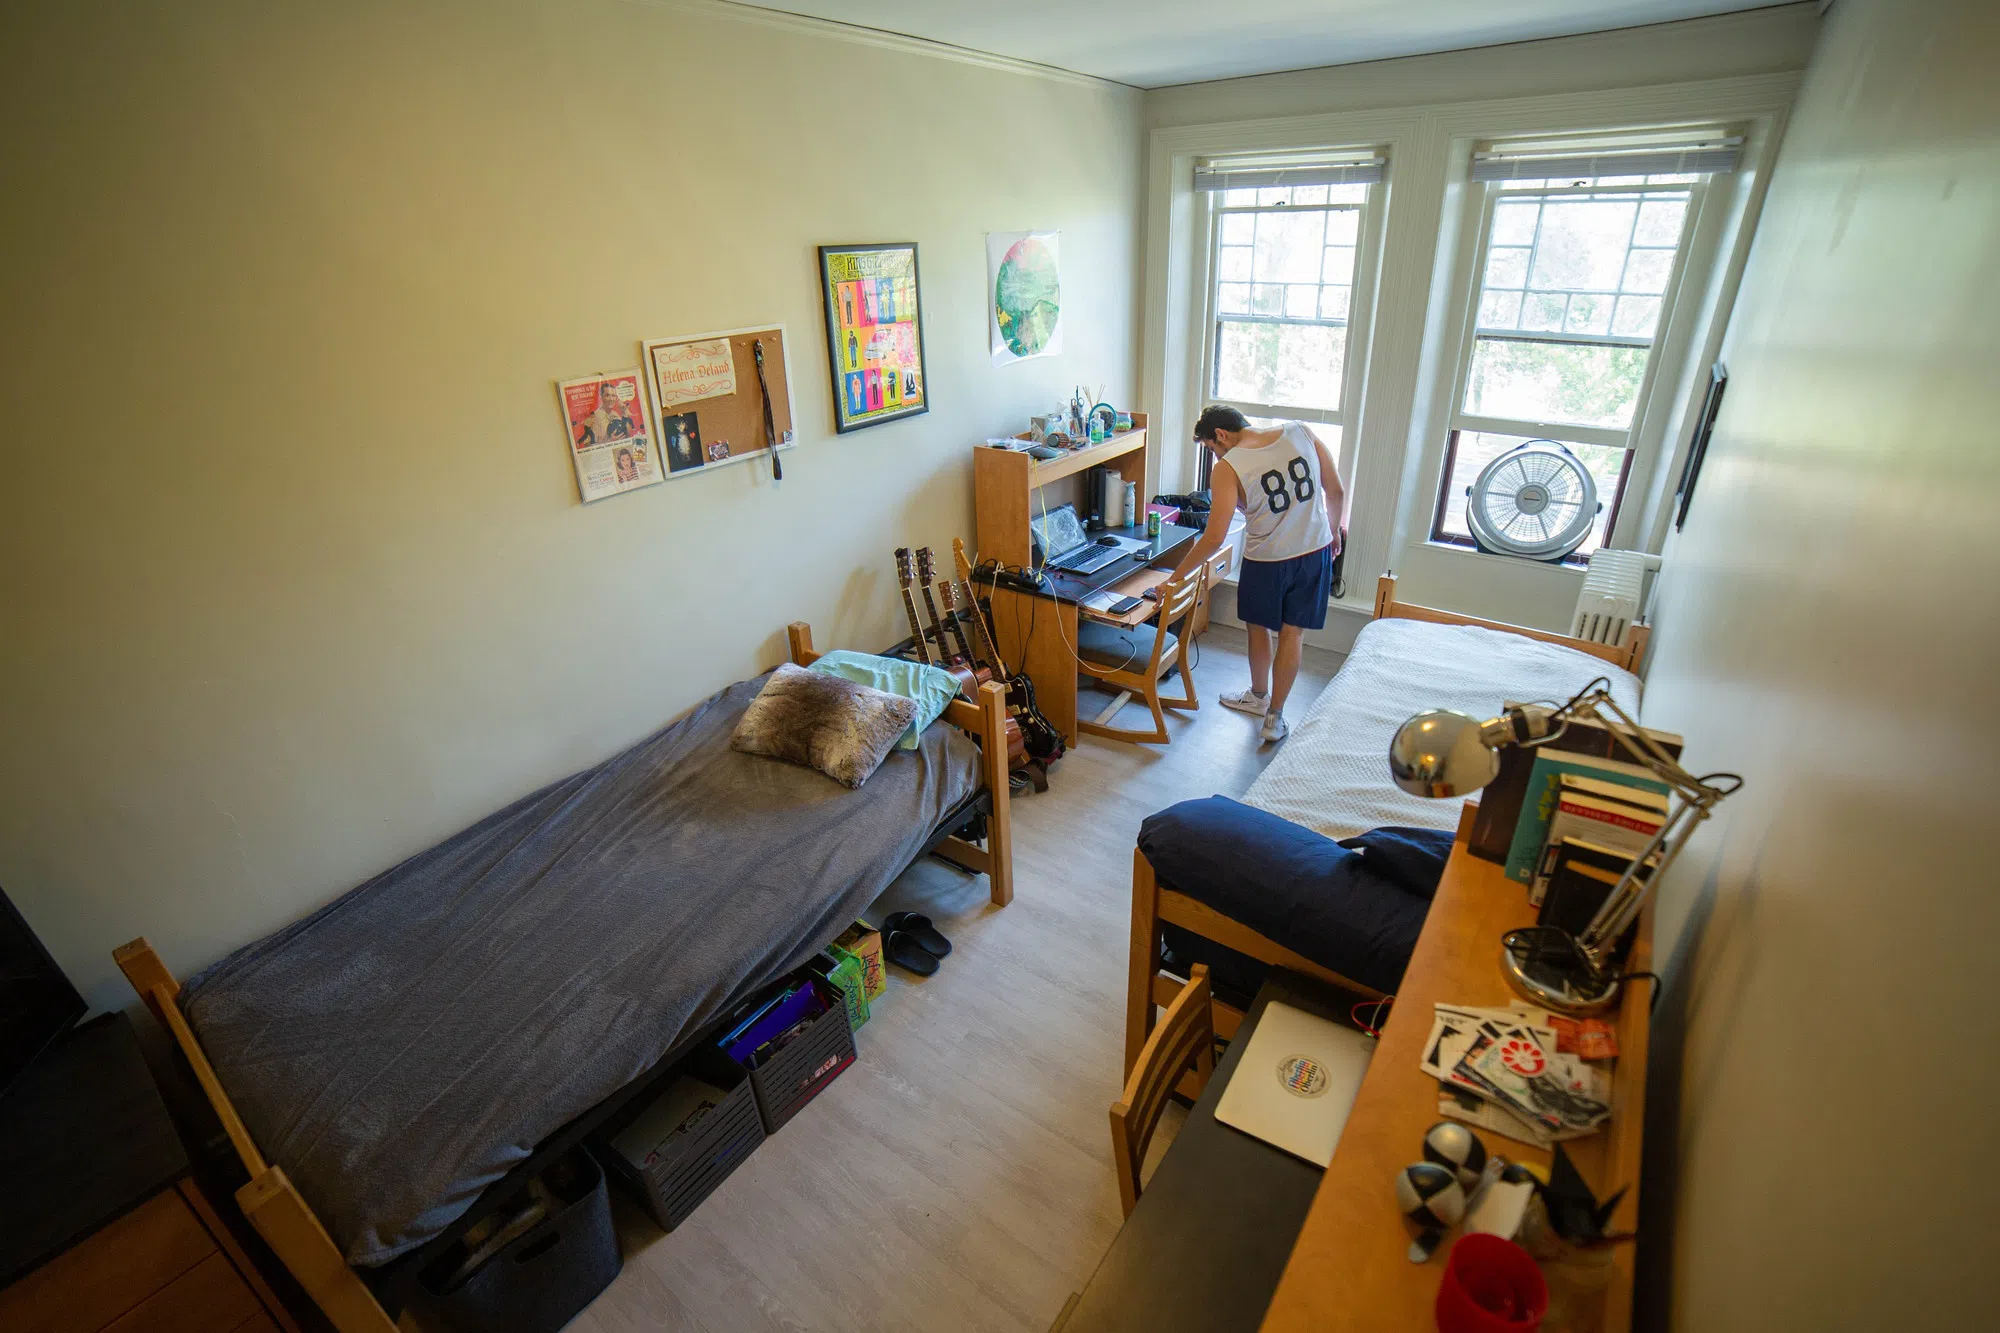 A student moves a chair in his dorm room, filled w 2 beds, 2 desks, belongings, and light streaming in from the 2 large windows. 